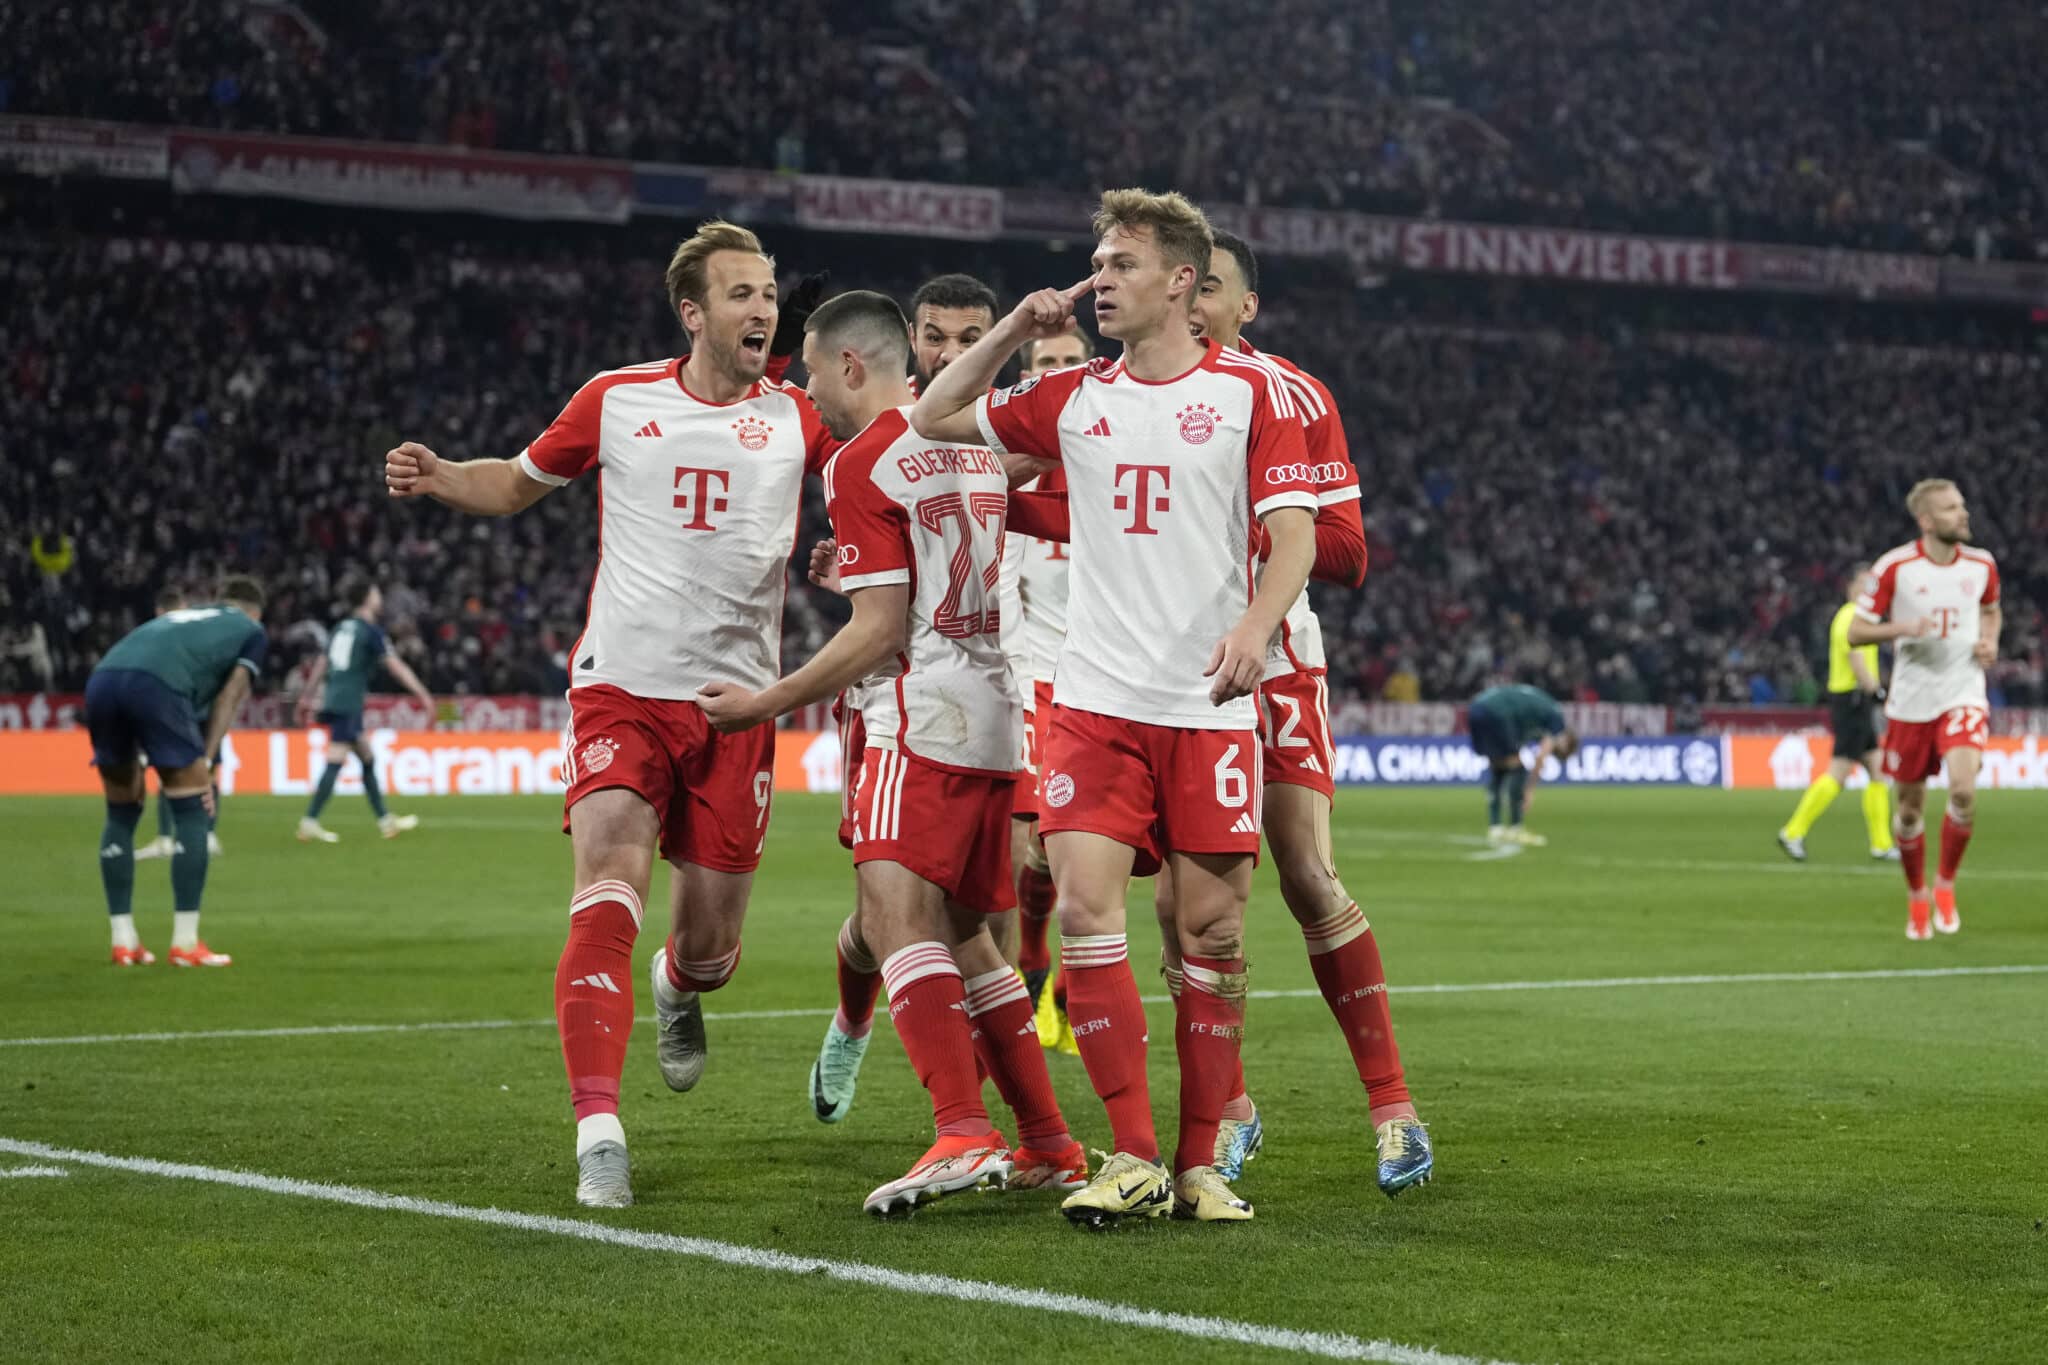 Joshua Kimmich delivered the killer blow to Mikel Arteta's Arsenal side as Bayern Munich prevailed in a thrilling Champions League quarter-final.